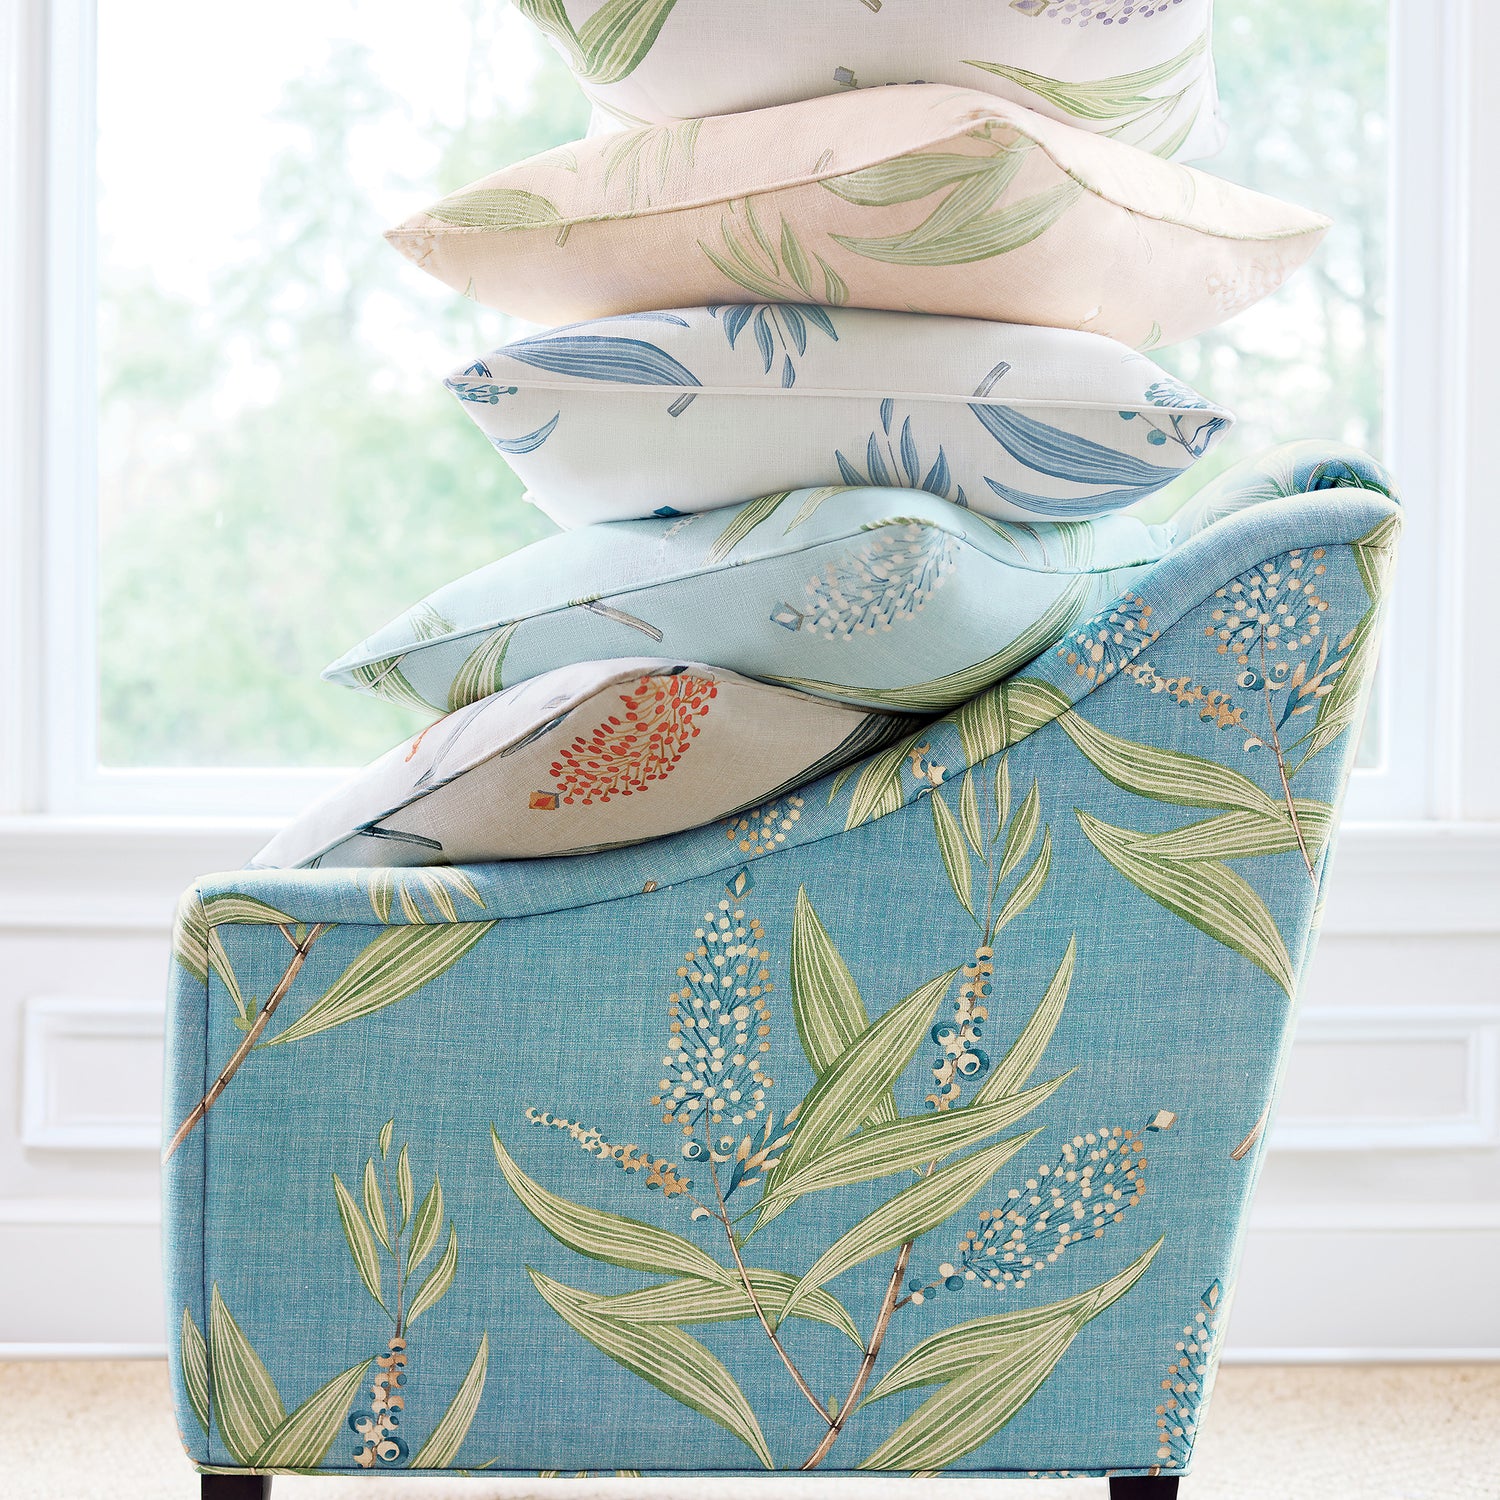 Chair in Winter Bud printed fabric in teal color - pattern number AF23136 - by Anna French